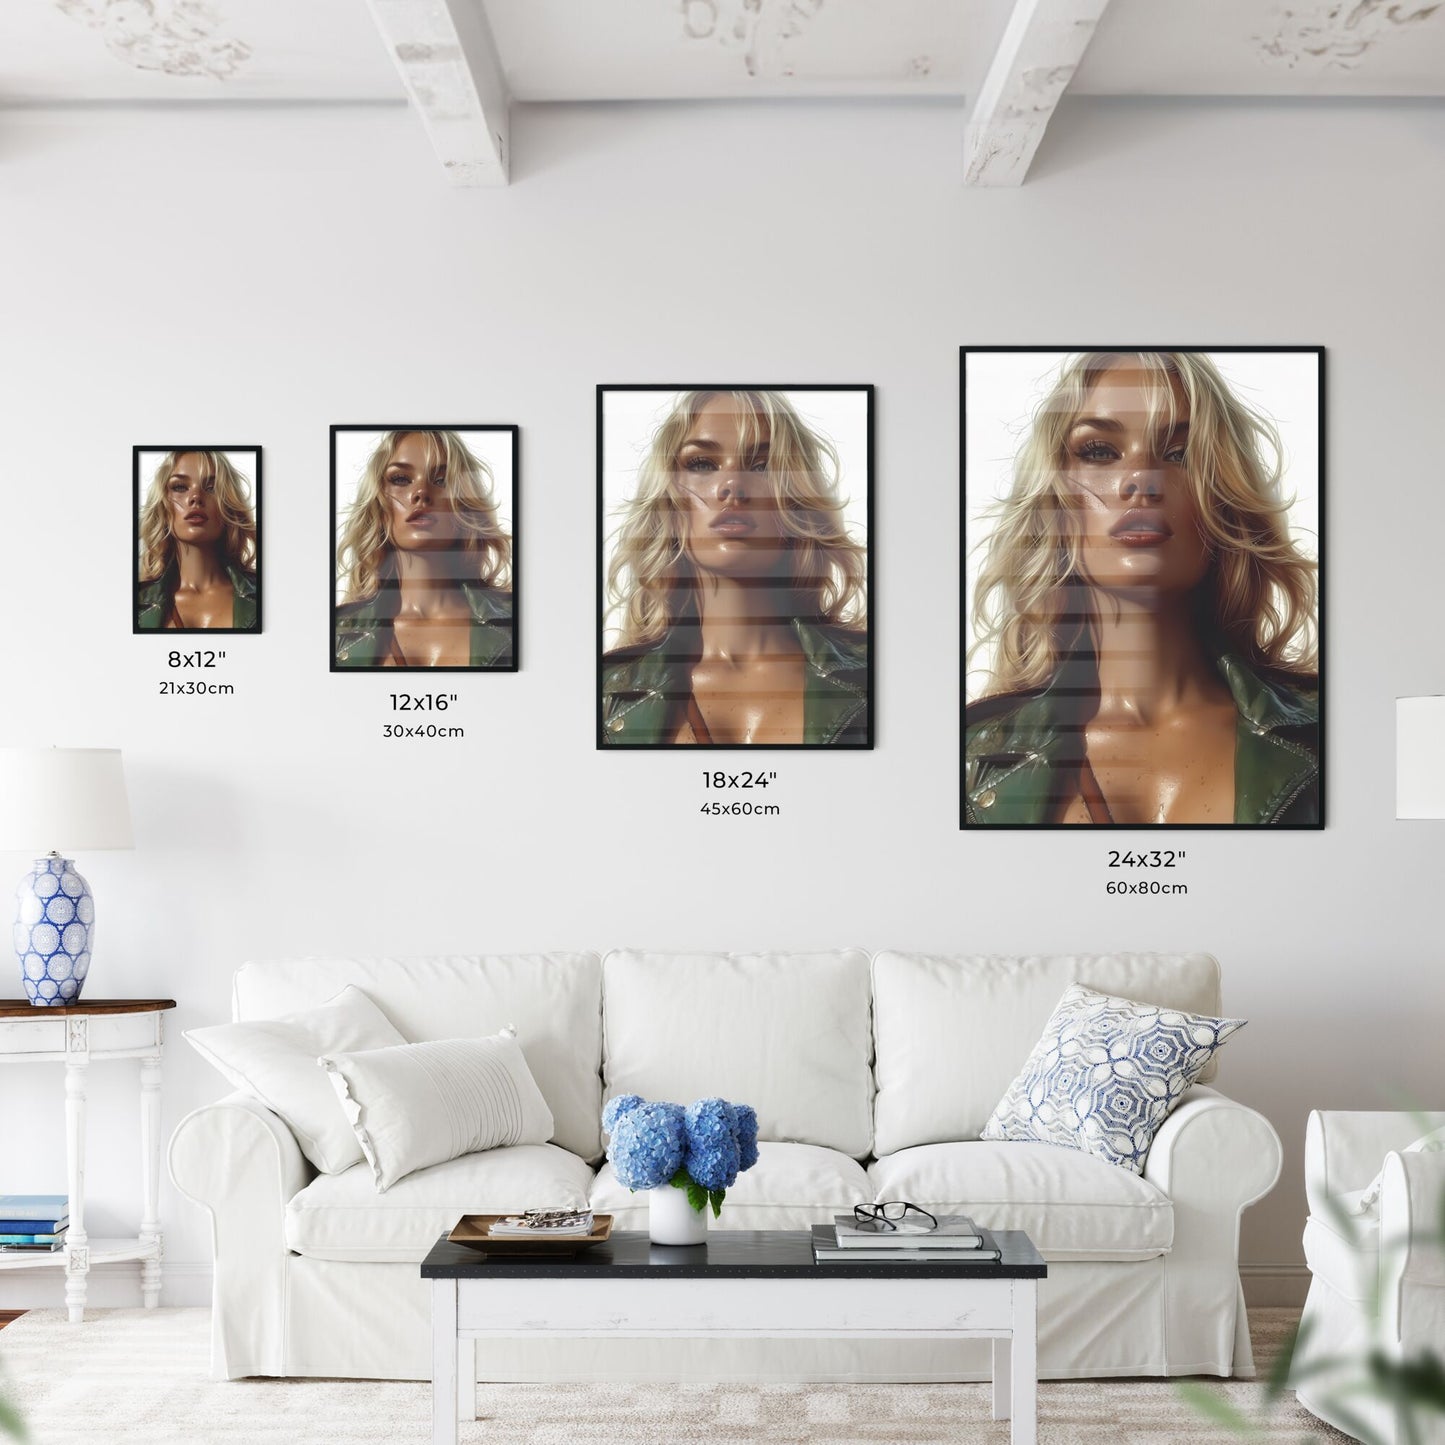 Sitting pin up factory worker girl - Art print of a woman with long blonde hair and freckles Default Title